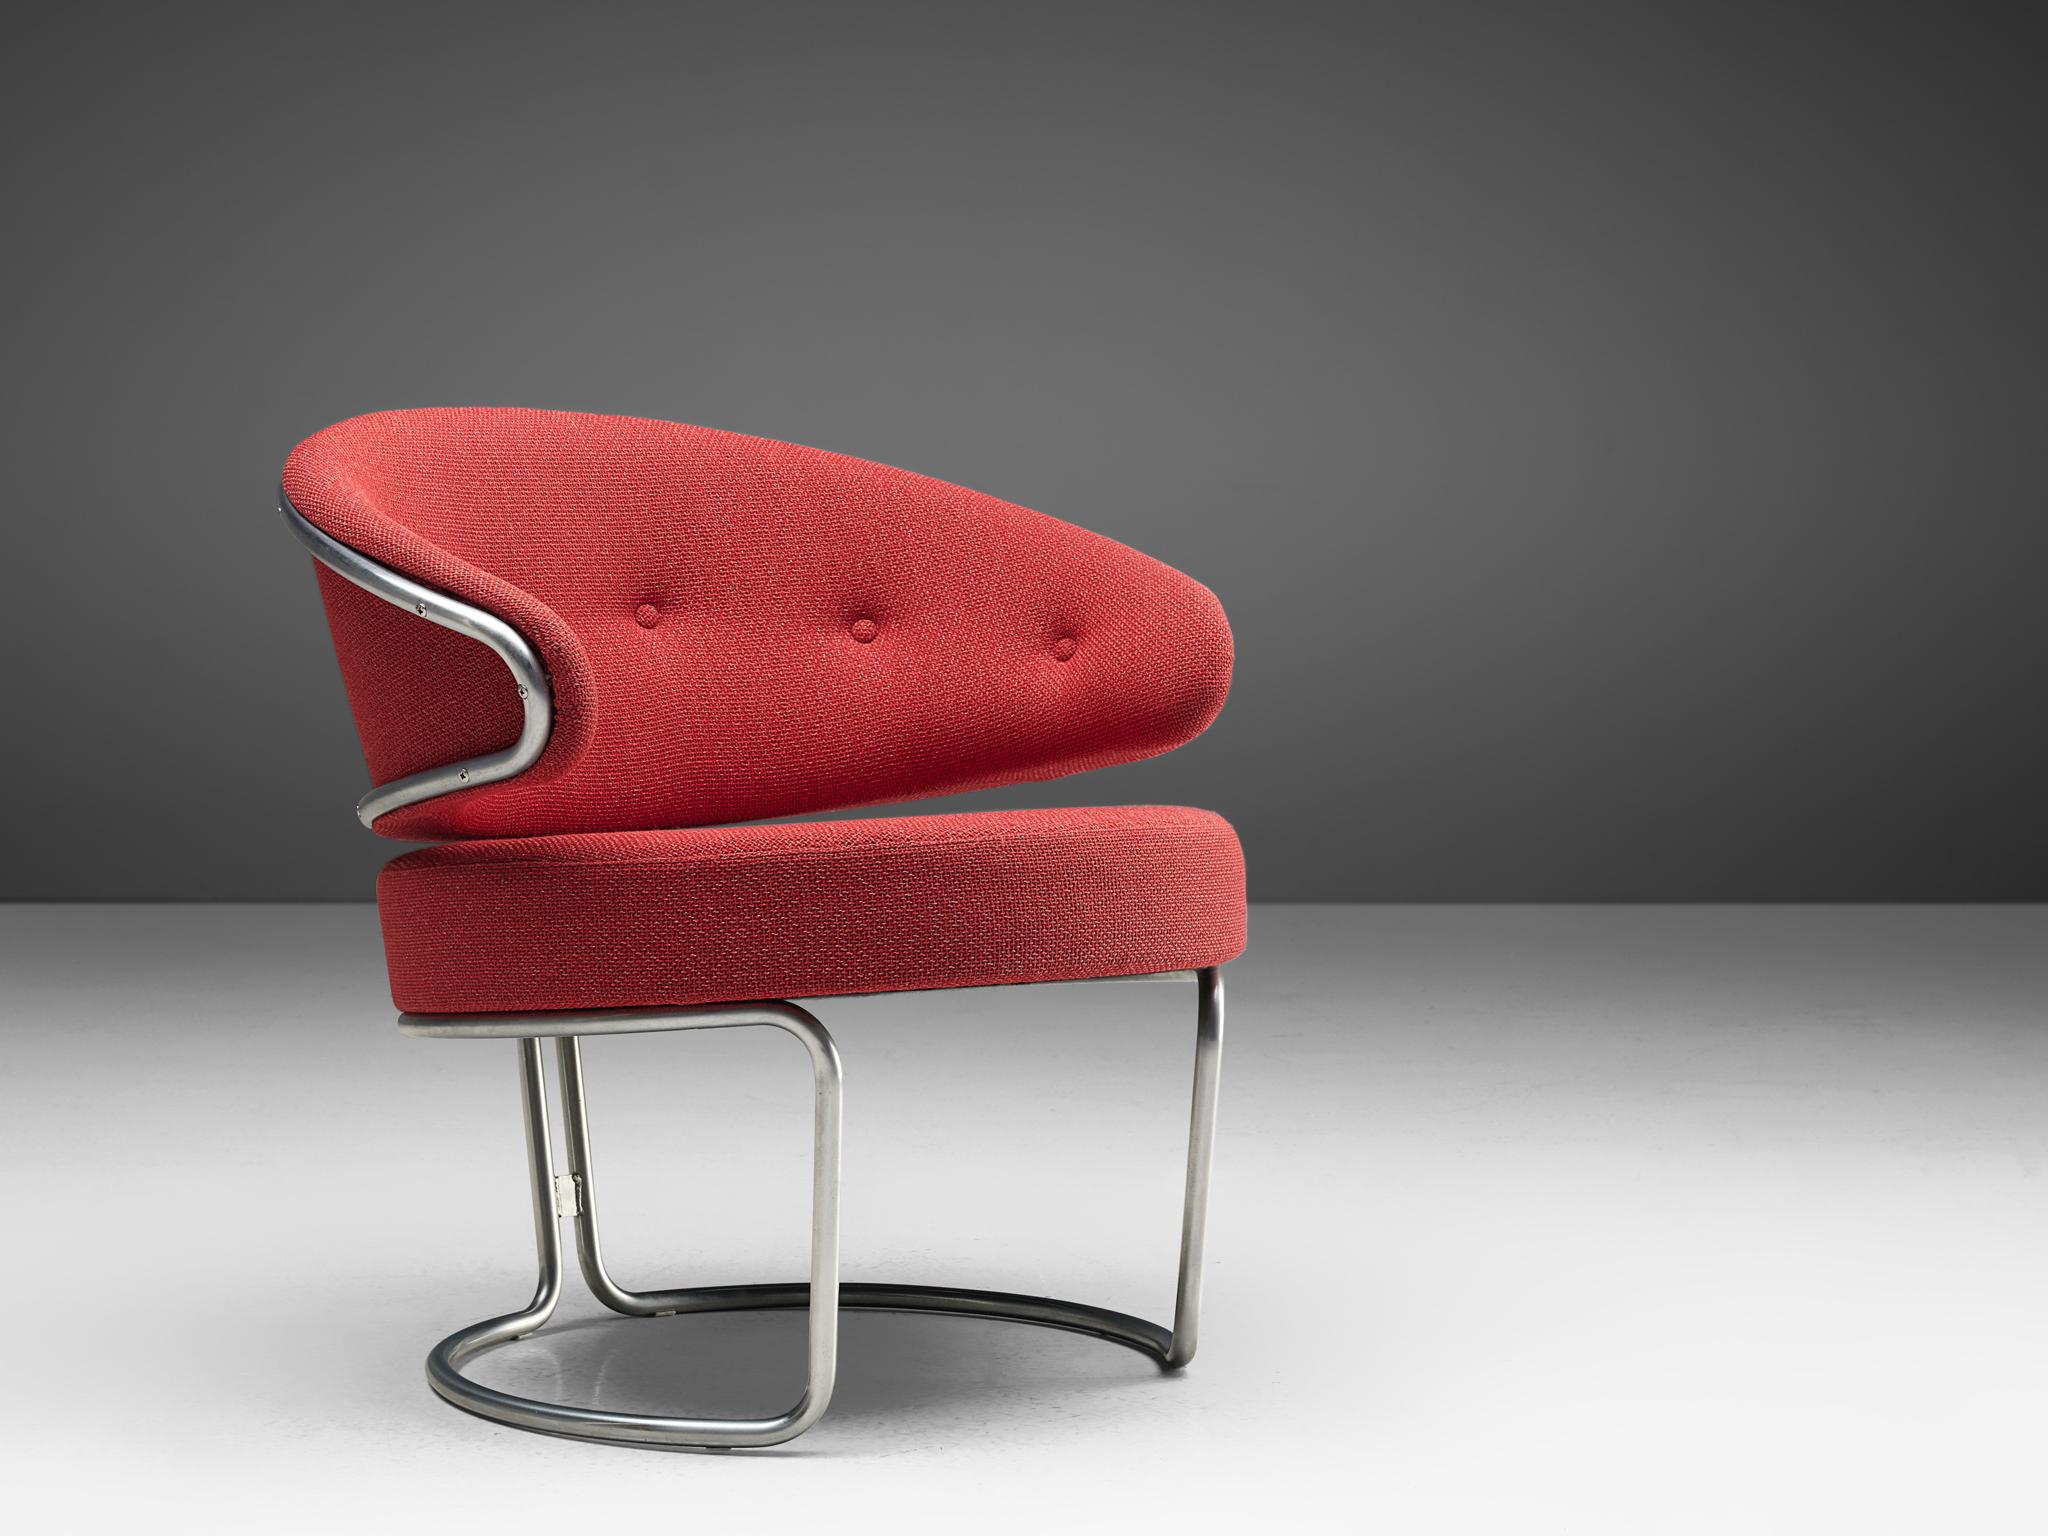 Grete Jalk for Fritz Hansen, lounge chair, metal and fabric, Denmark, 1968.

A postwar lounge chair designed by Grete Jalk in 1968. The piece is executed with a tubular chromed steel frame and red cushions in the shape of the frame. The piece